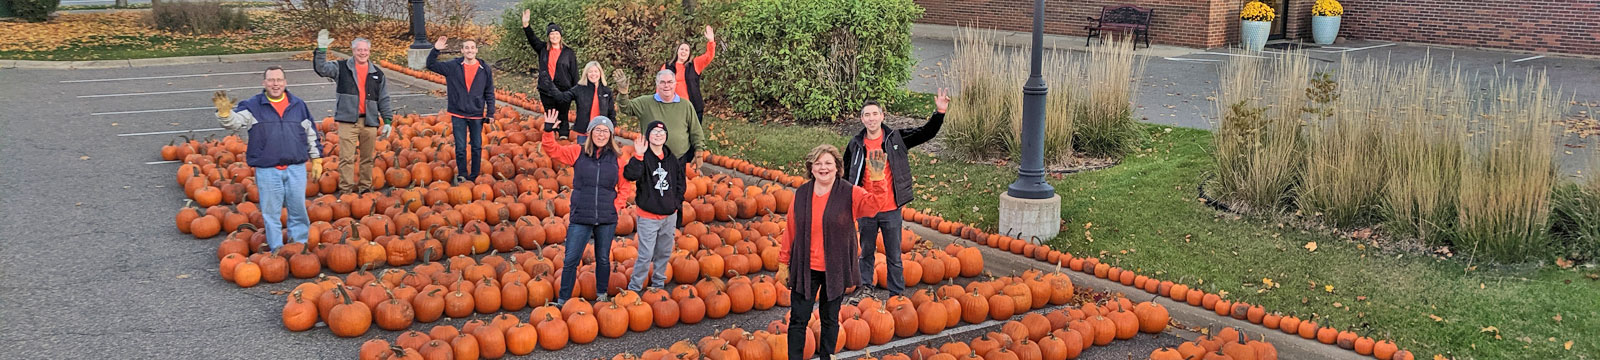 image of a group of Gateway Bank associates waving at the annual fall festival